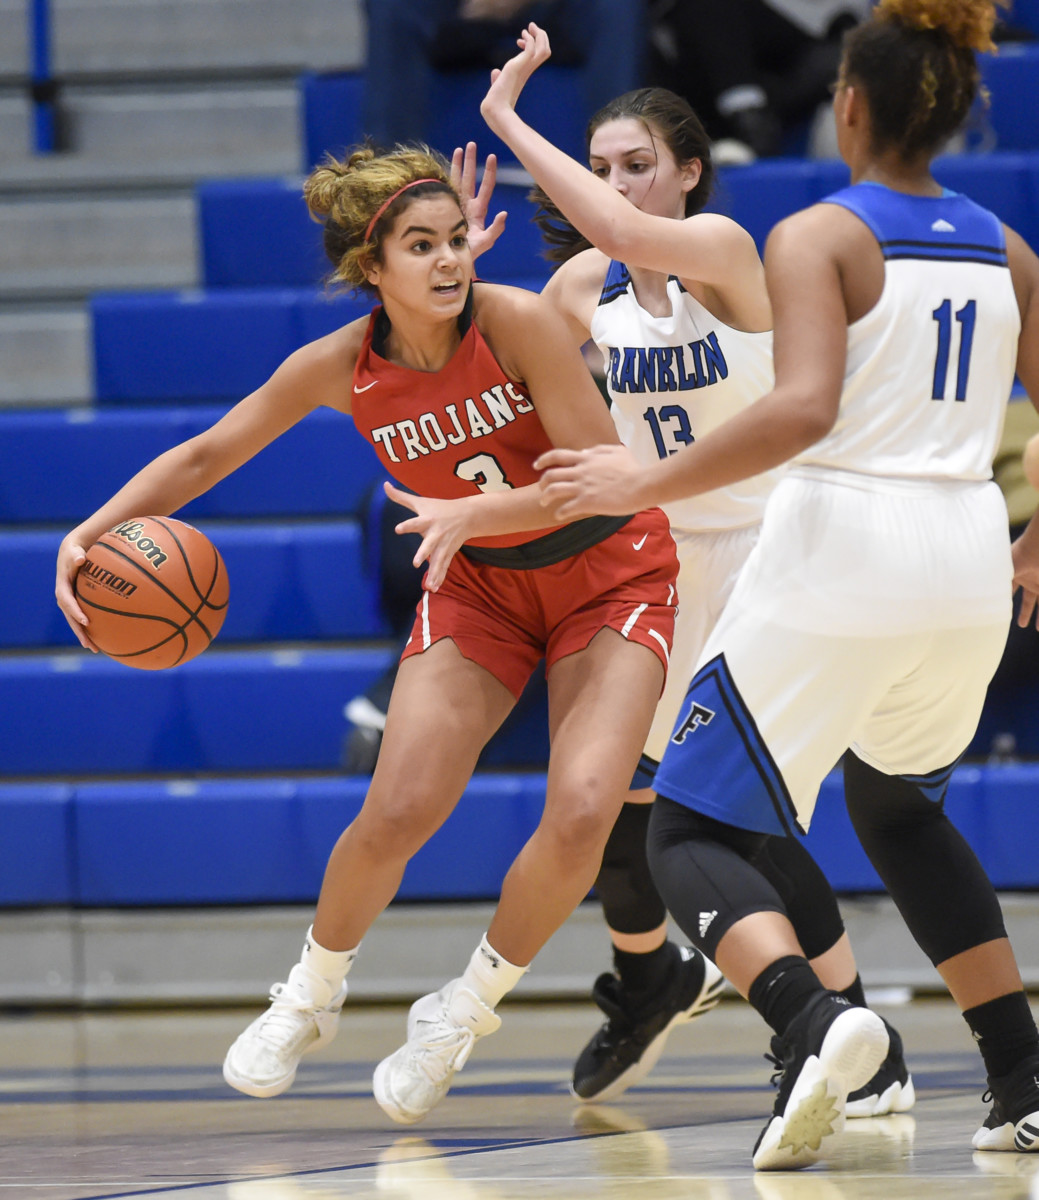 Center Grove freshman Aubrie Booker attempts to drive around Franklin freshman Scarlett Kimbrell on Tuesday during Center Grove’s 29-30 loss at Franklin Community High School.